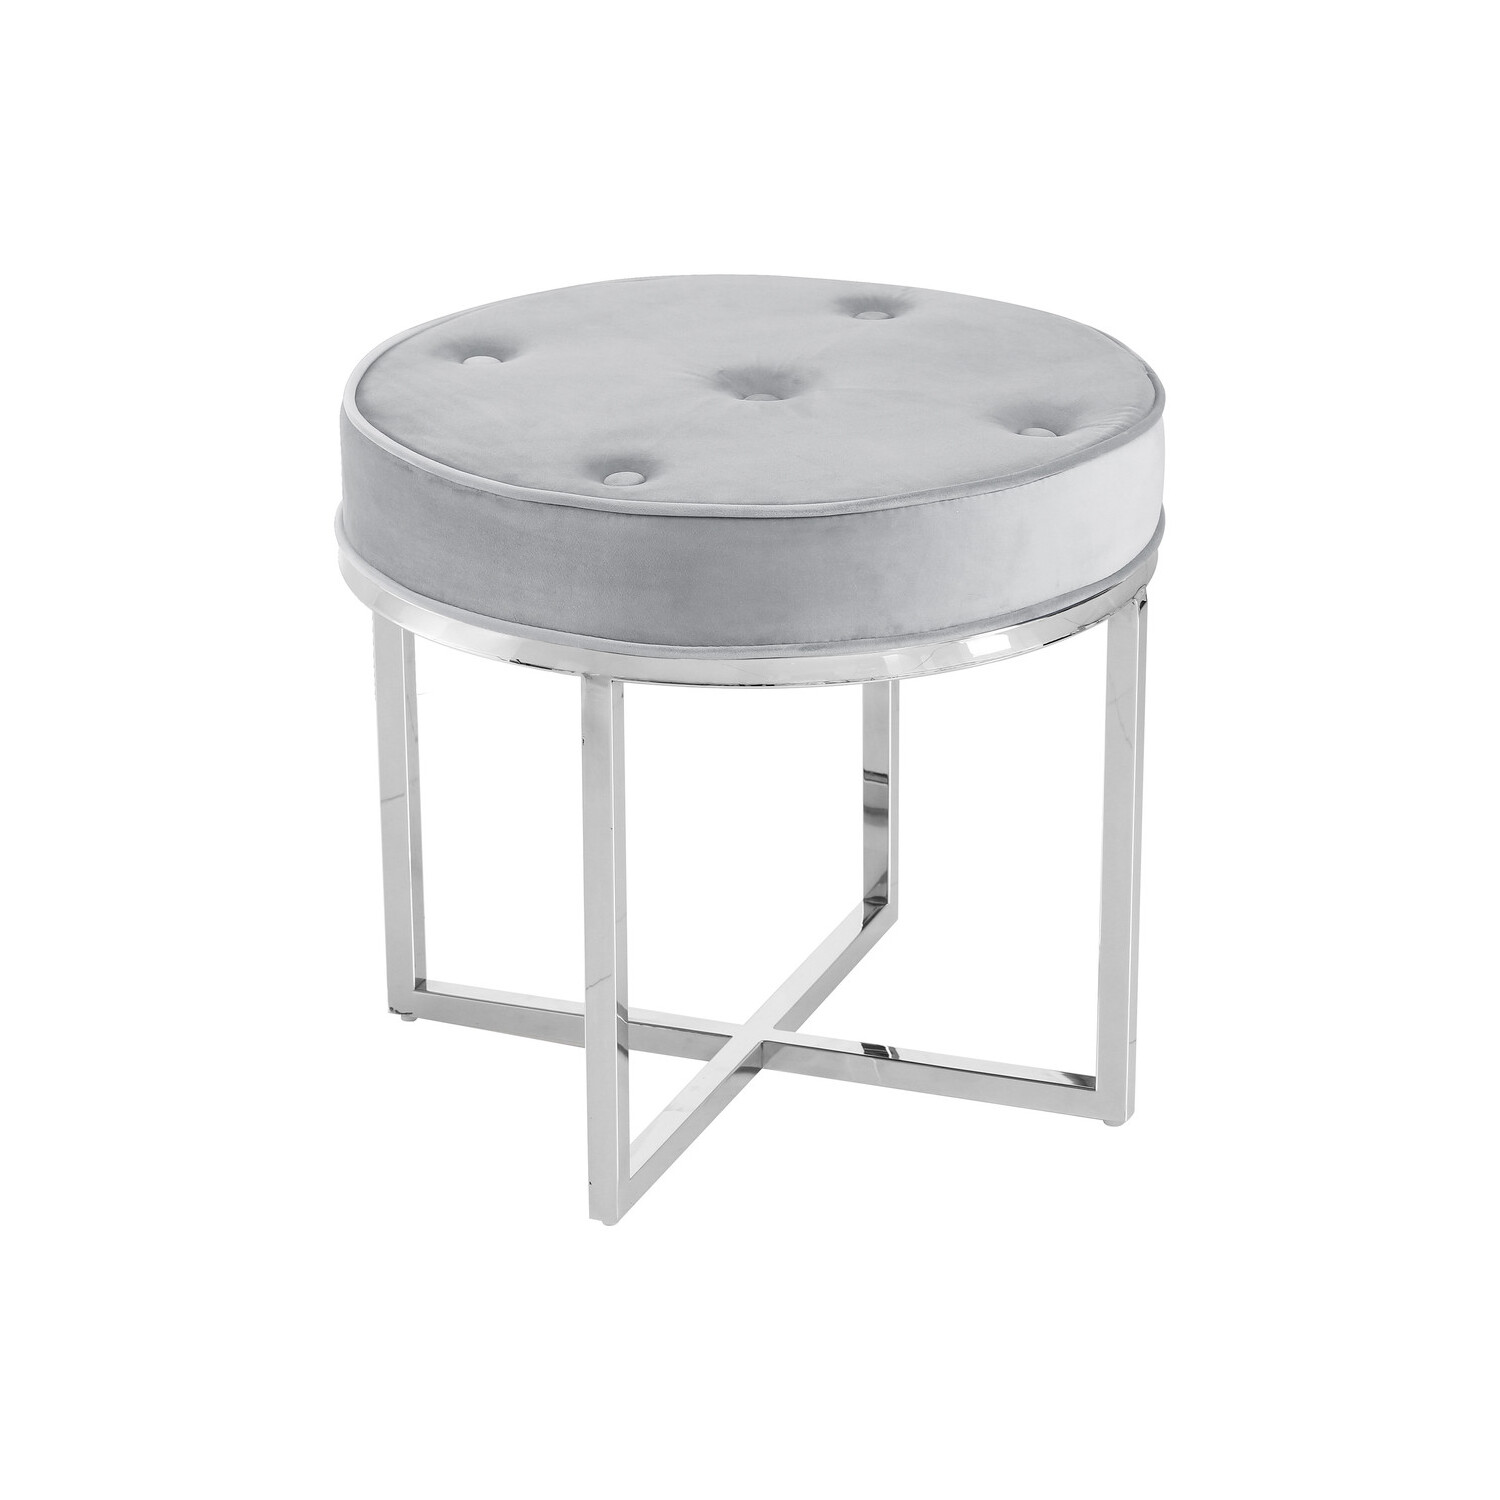 Best Master Furniture E29 Grey Velvet Fabric with Stainless Steel Round Stool - image 1 of 3